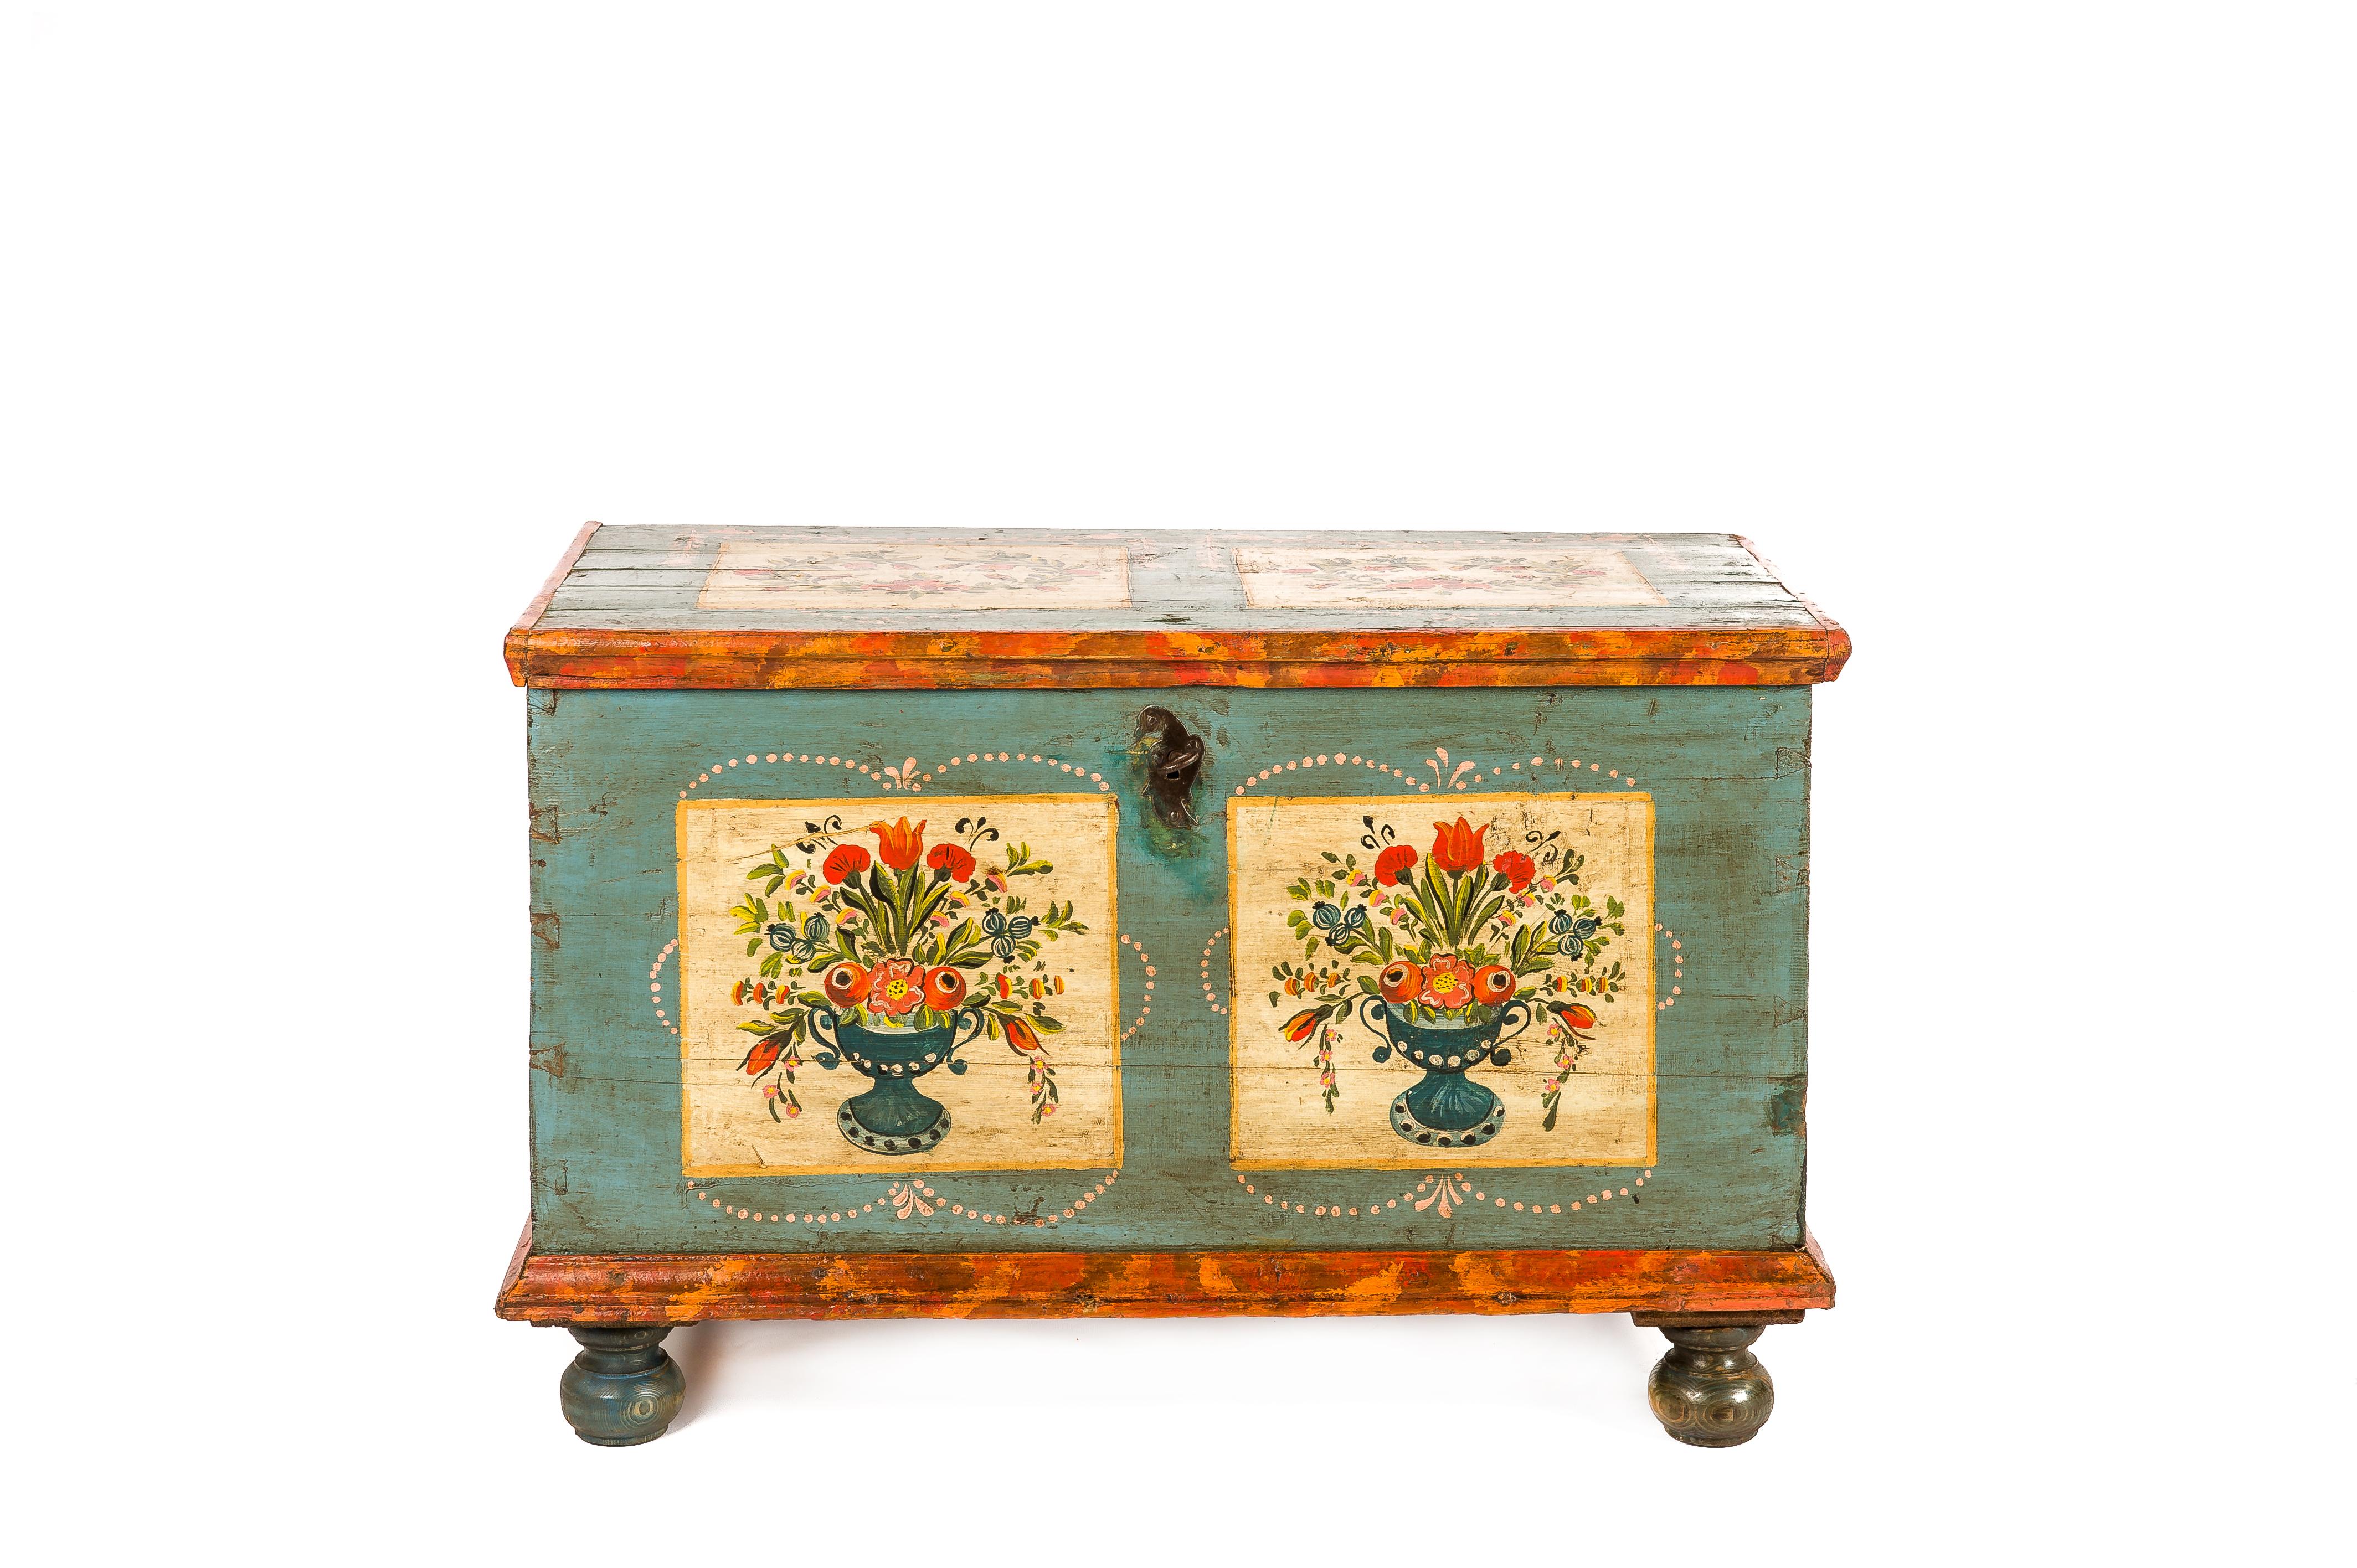 Austrian Antique 19th-century solid pine and traditional painted Bohemian trunk or chest